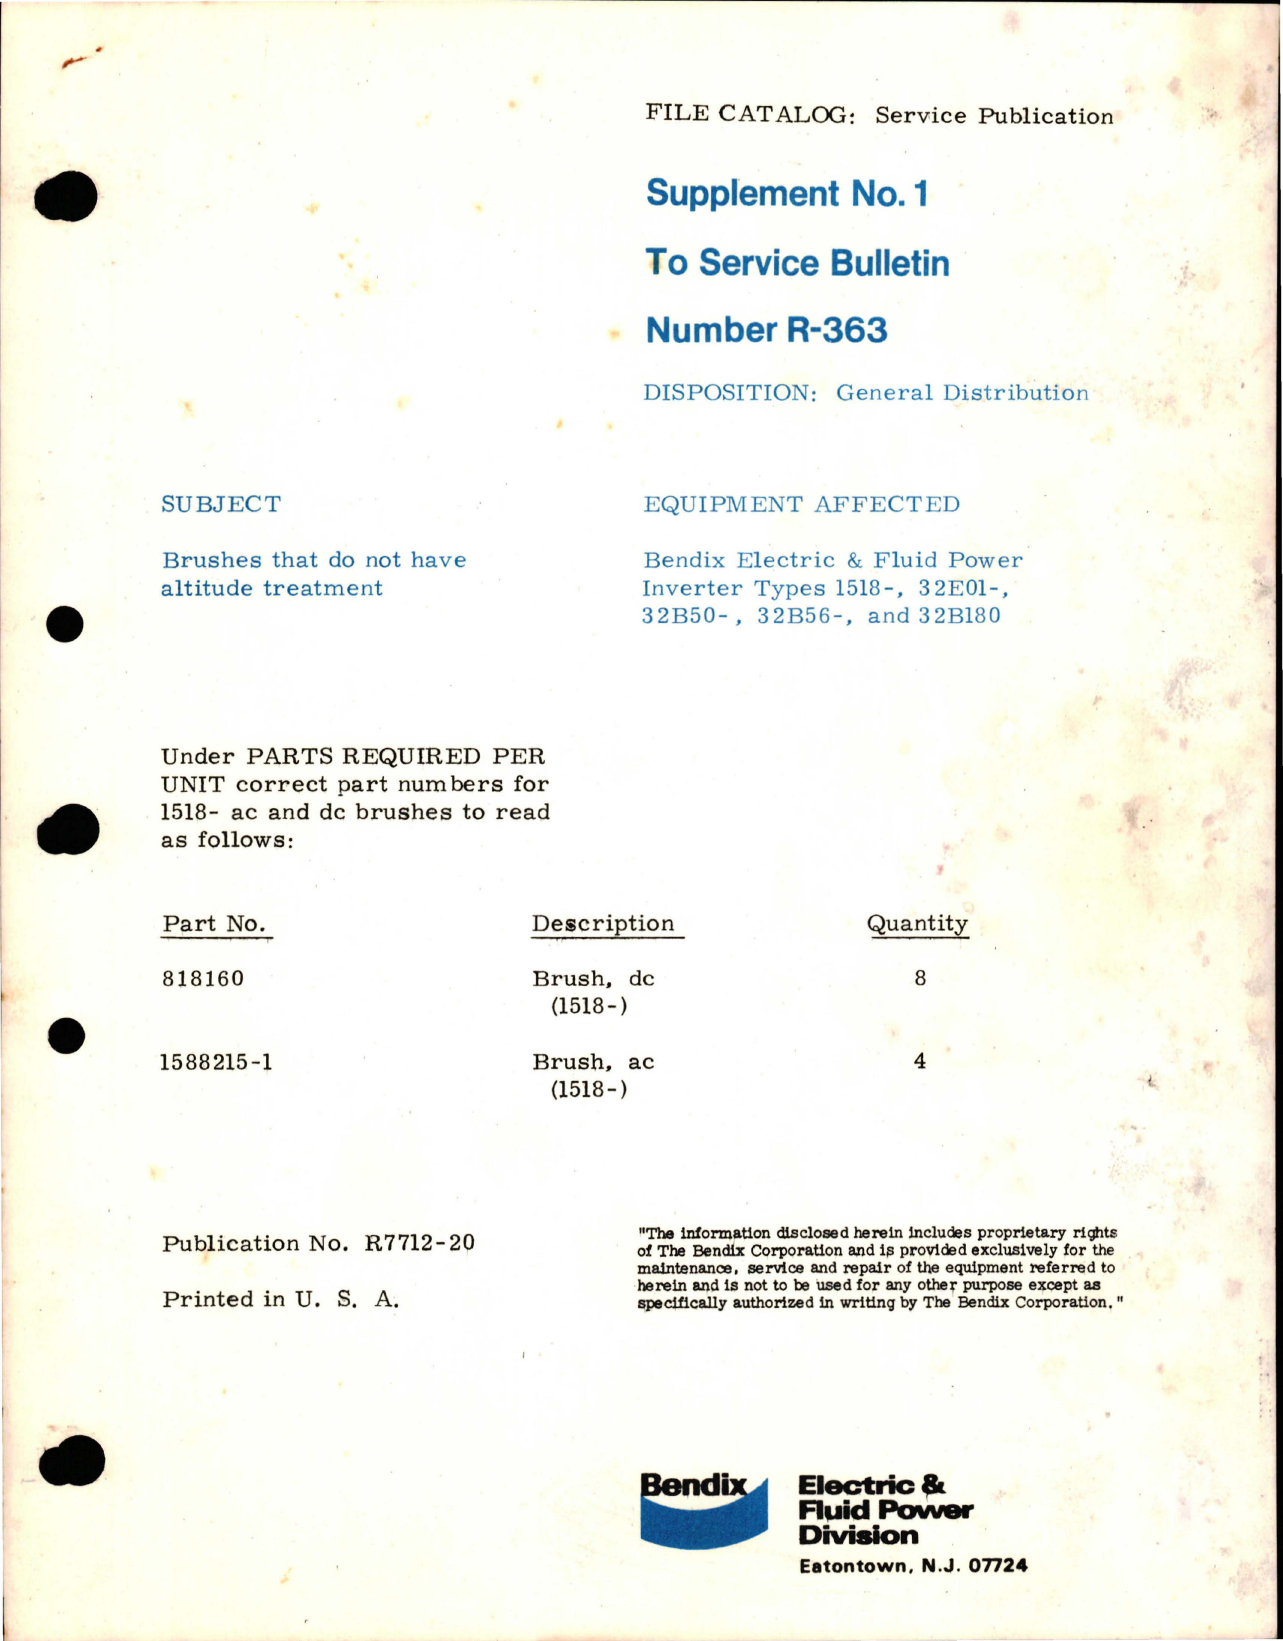 Sample page 1 from AirCorps Library document: Supplement No. 1 to Service Bulletin No. R-363, Brushes that do not have Altitude Treatment - Types 1518-, 32E01-, 32B50-, 32B56-, 32B108- 